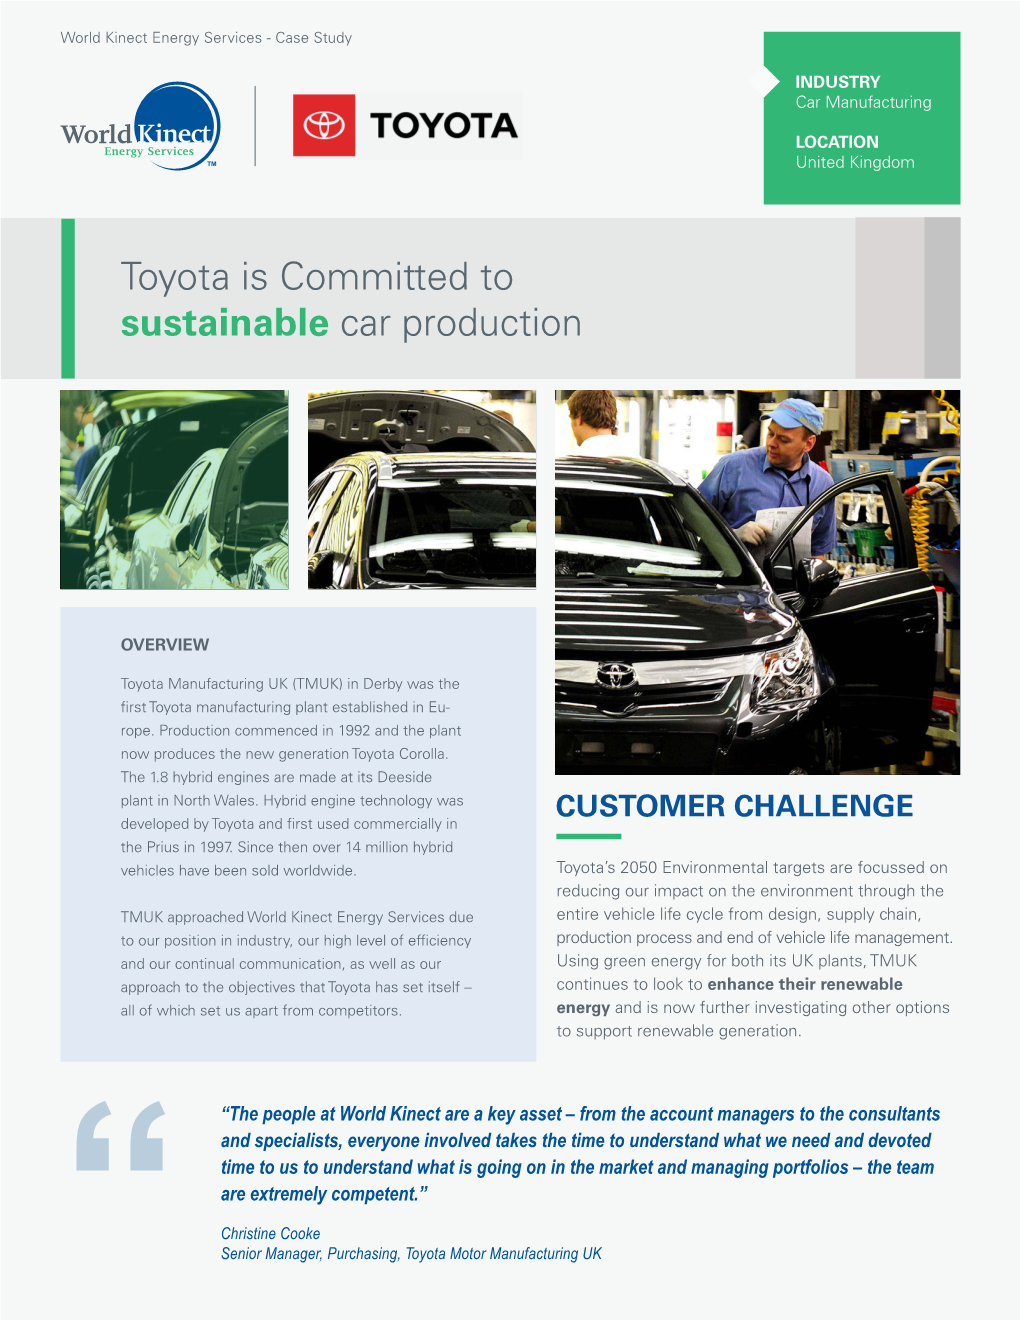 Toyota Is Committed to Sustainable Car Production